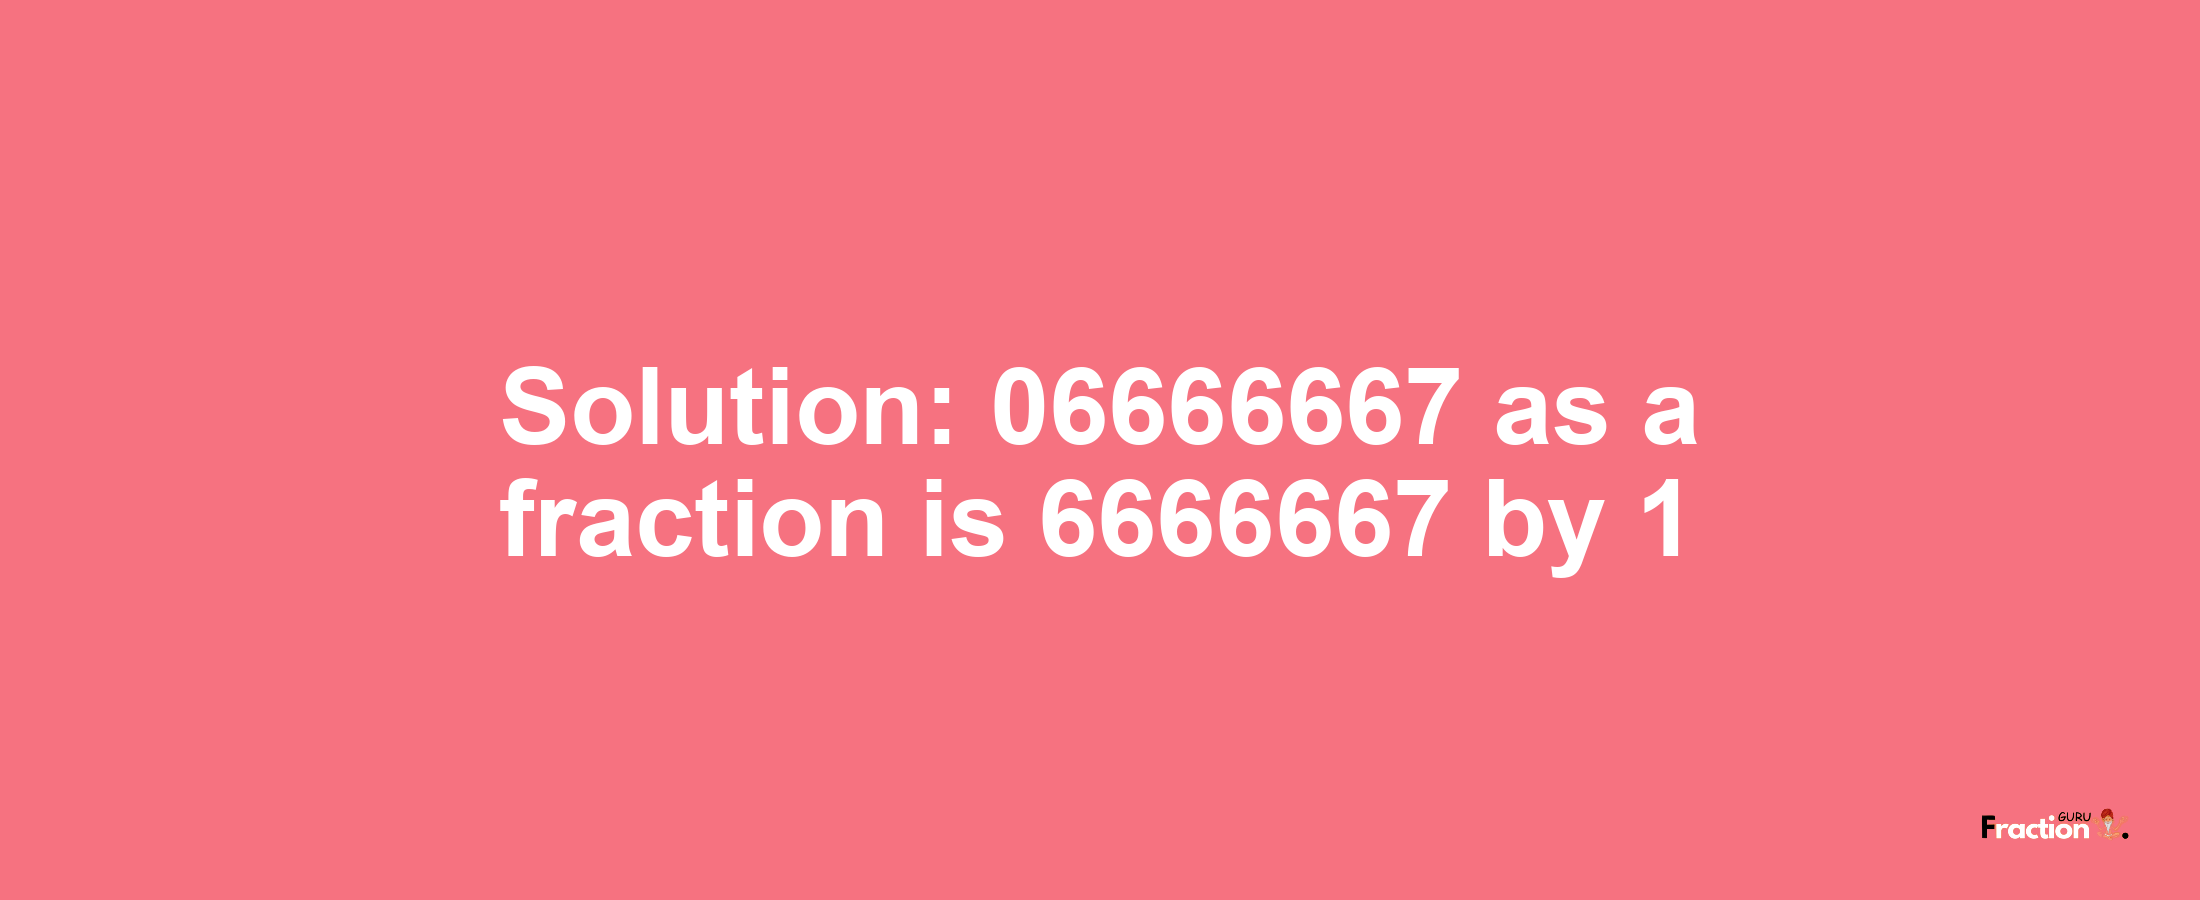 Solution:06666667 as a fraction is 6666667/1